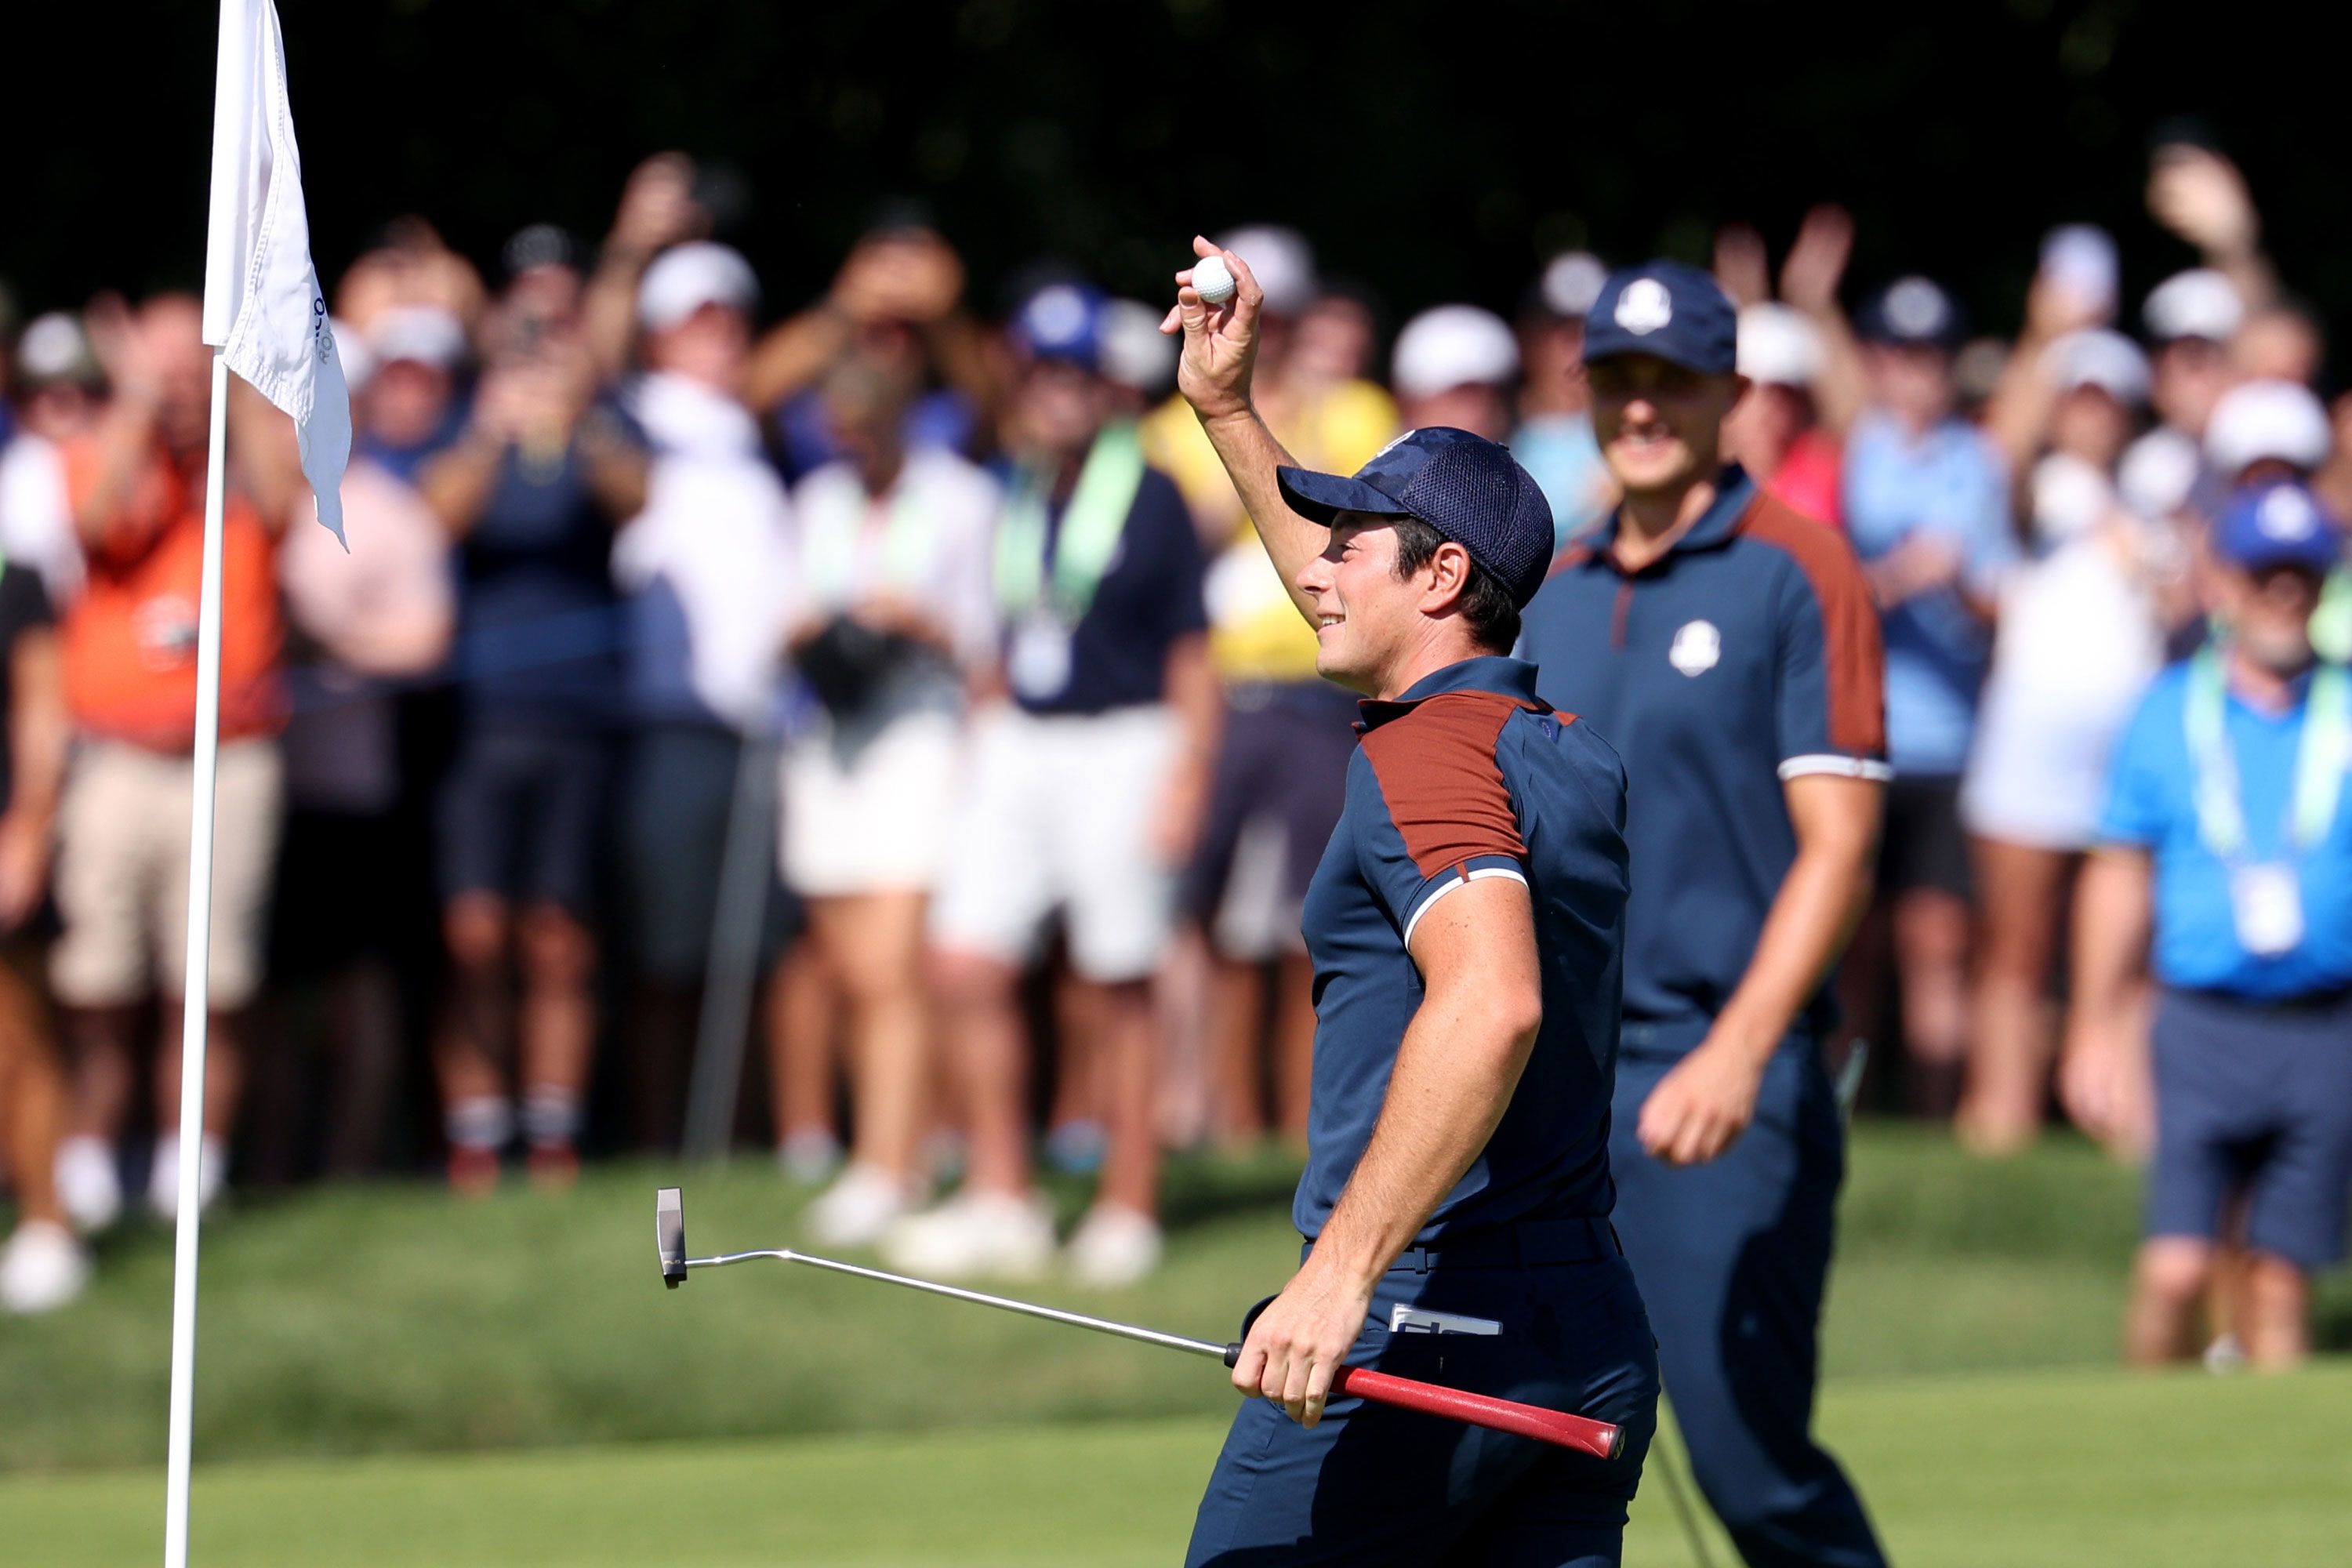 WATCH: Viktor Hovland Makes Ace on Par Four in Ryder Cup Practise Round